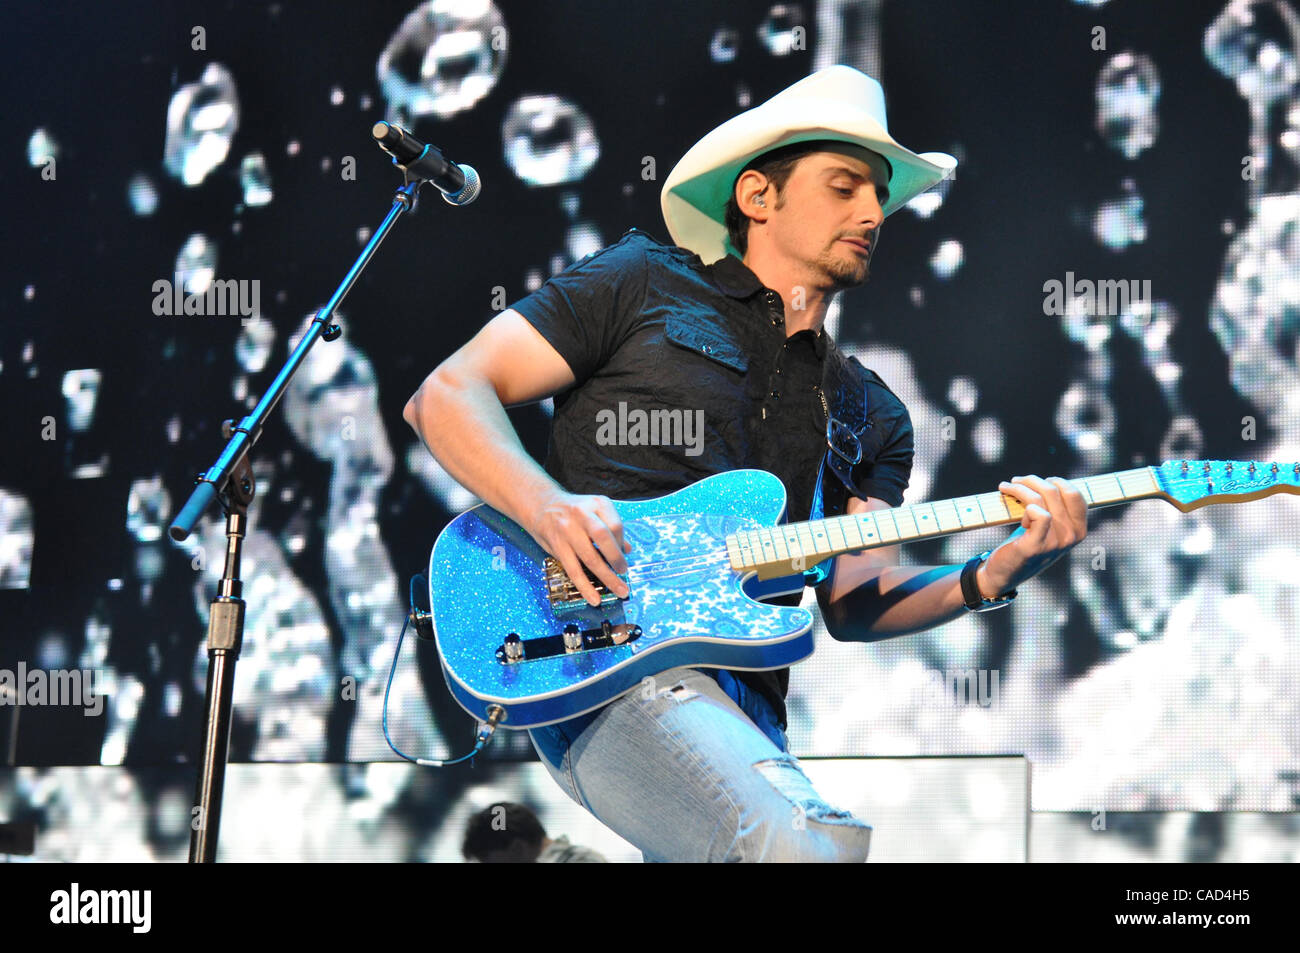 Aug 28, 2010 - Raleigh, North Carolina USA Country singer BRAD PAISLEY performs during his H2O World Tour at the Time Warner Cable Music Pavillion in Raleigh. (copyright Tina Fultz) Stock Photo